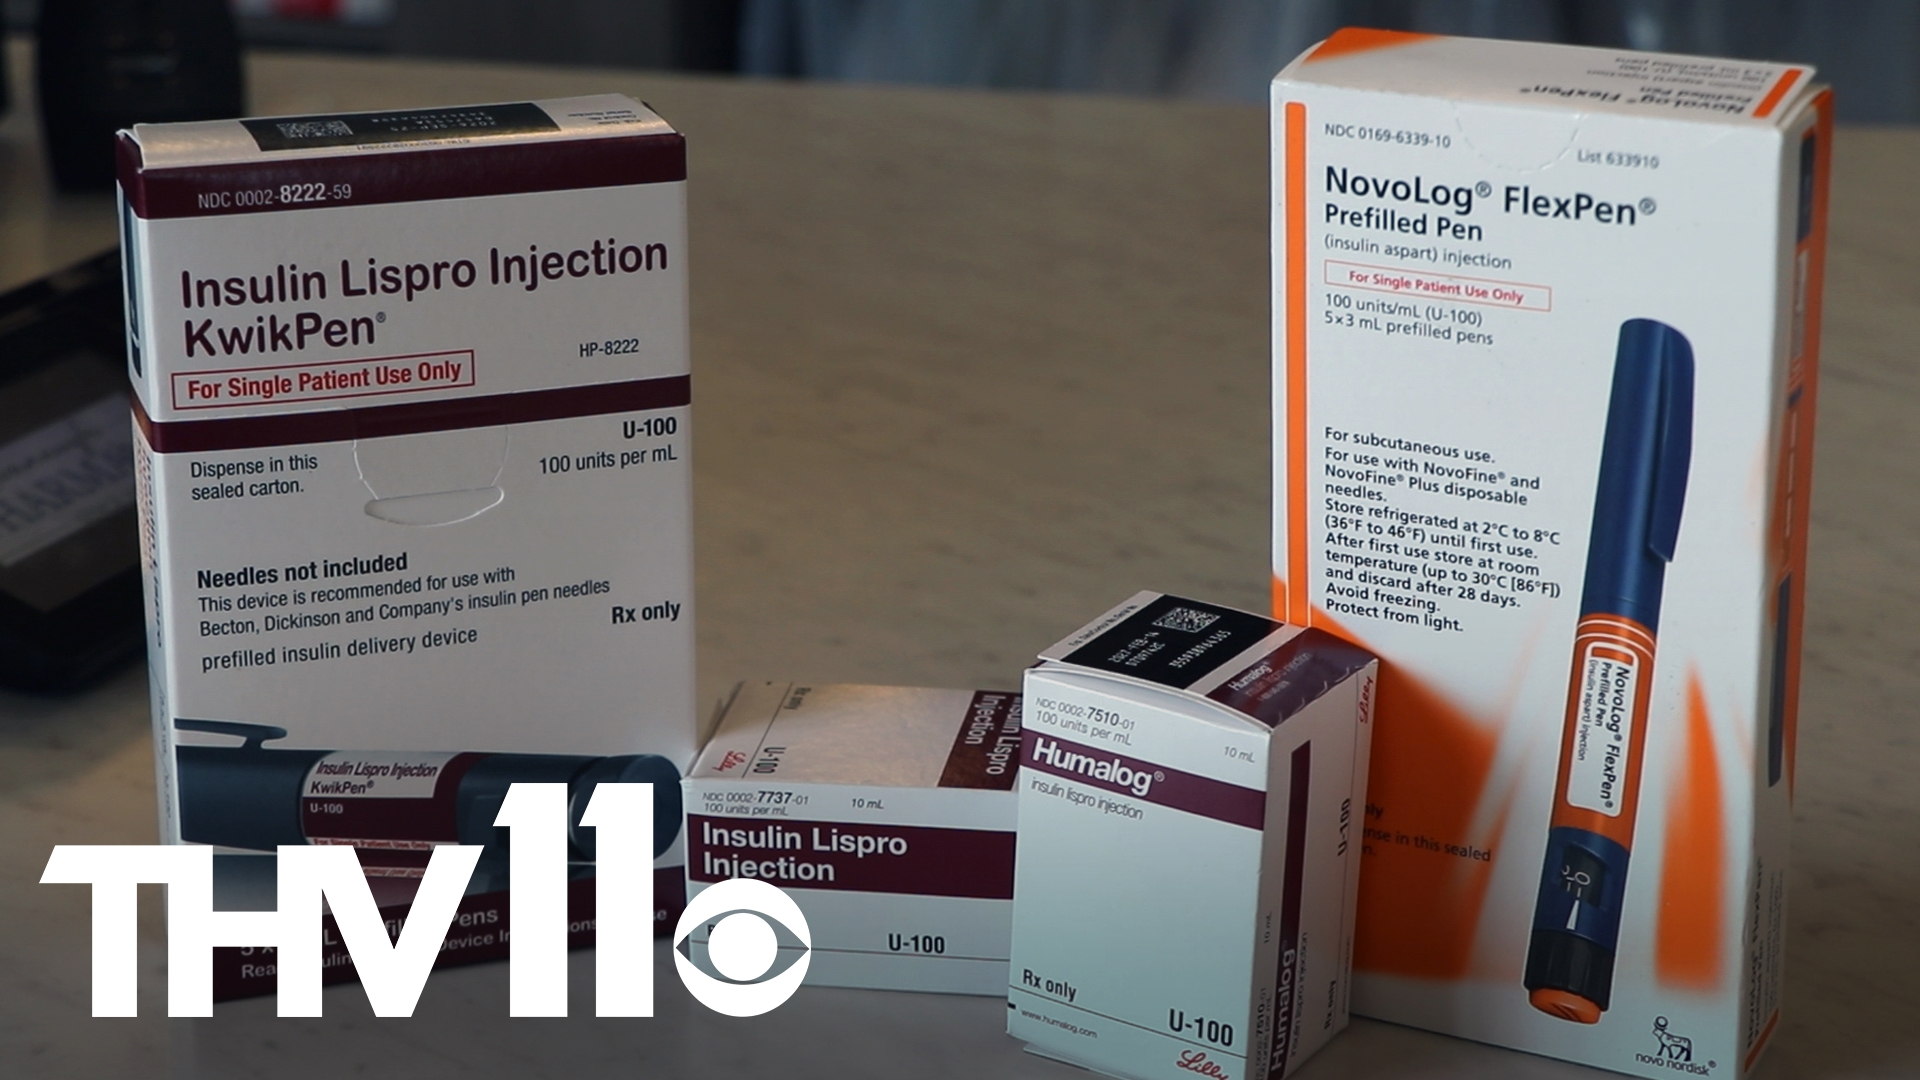 It's getting harder to get supply of certain insulin products at some Arkansas pharmacies, leading pharmacists to find other options.